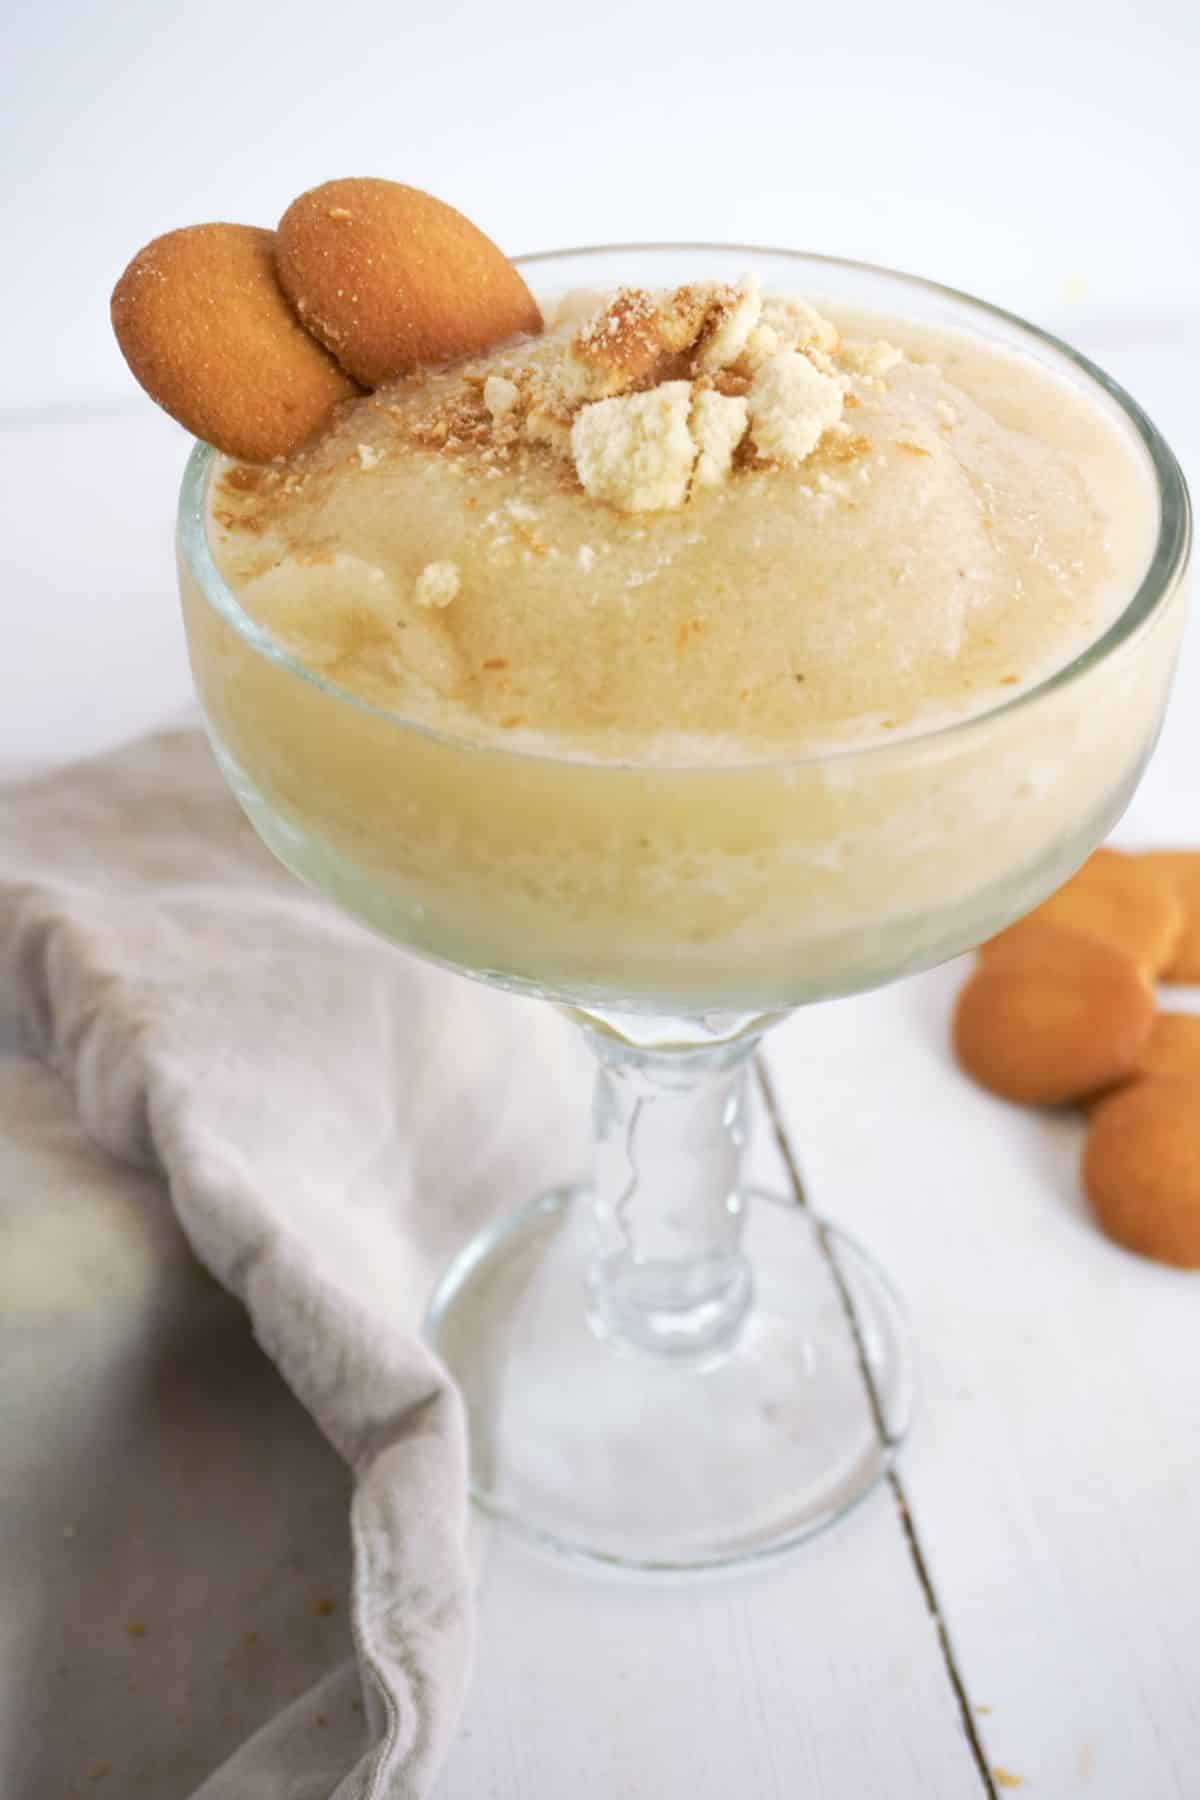 Banana Margarita in a serving glass, garnished with Nilla Wafers.